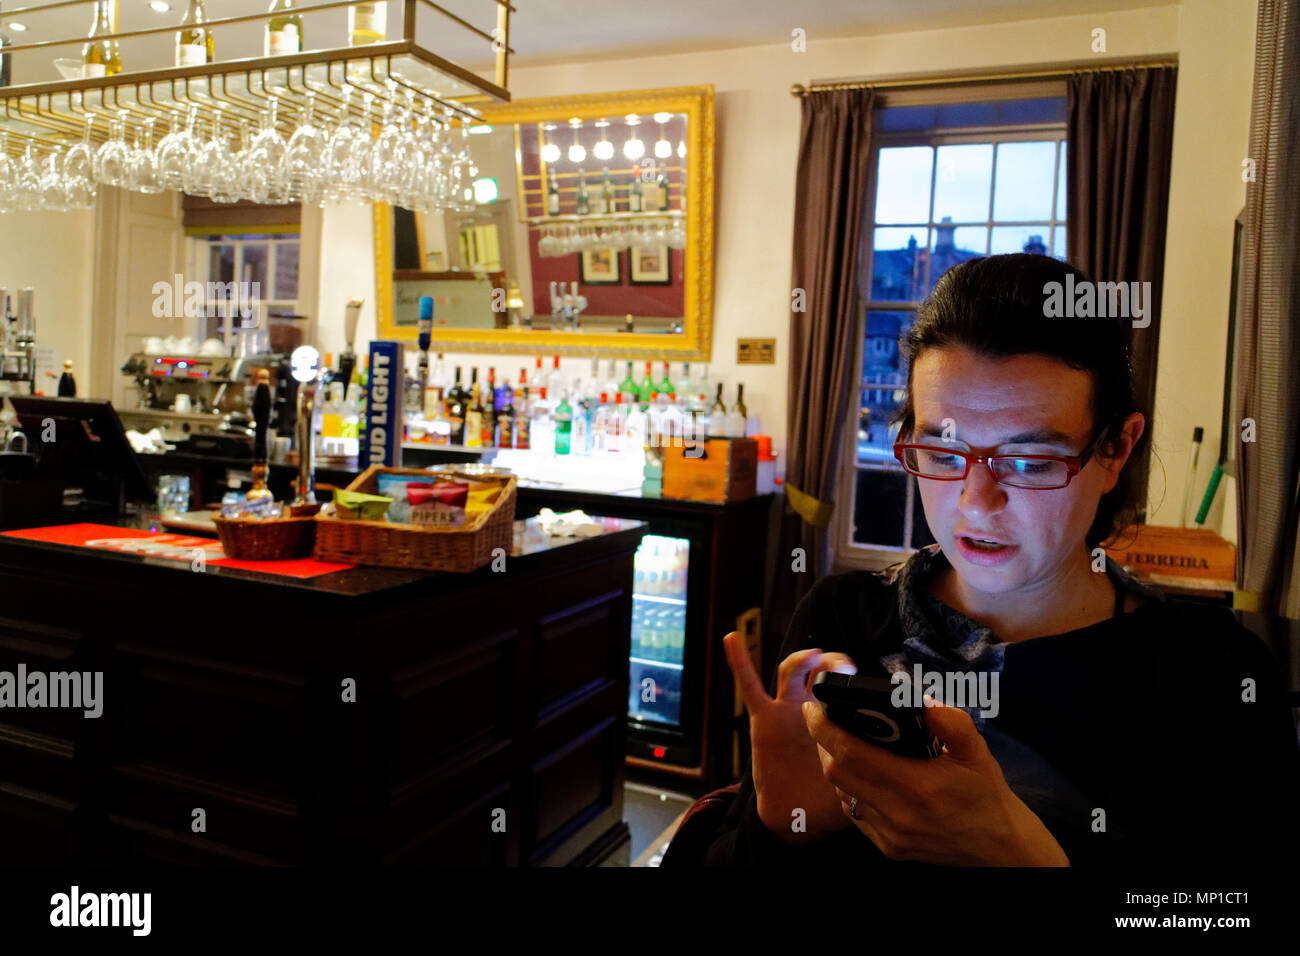 A young woman getting good news on her iphone in the bar of the Rutland Arms in Bakewell, England Stock Photo